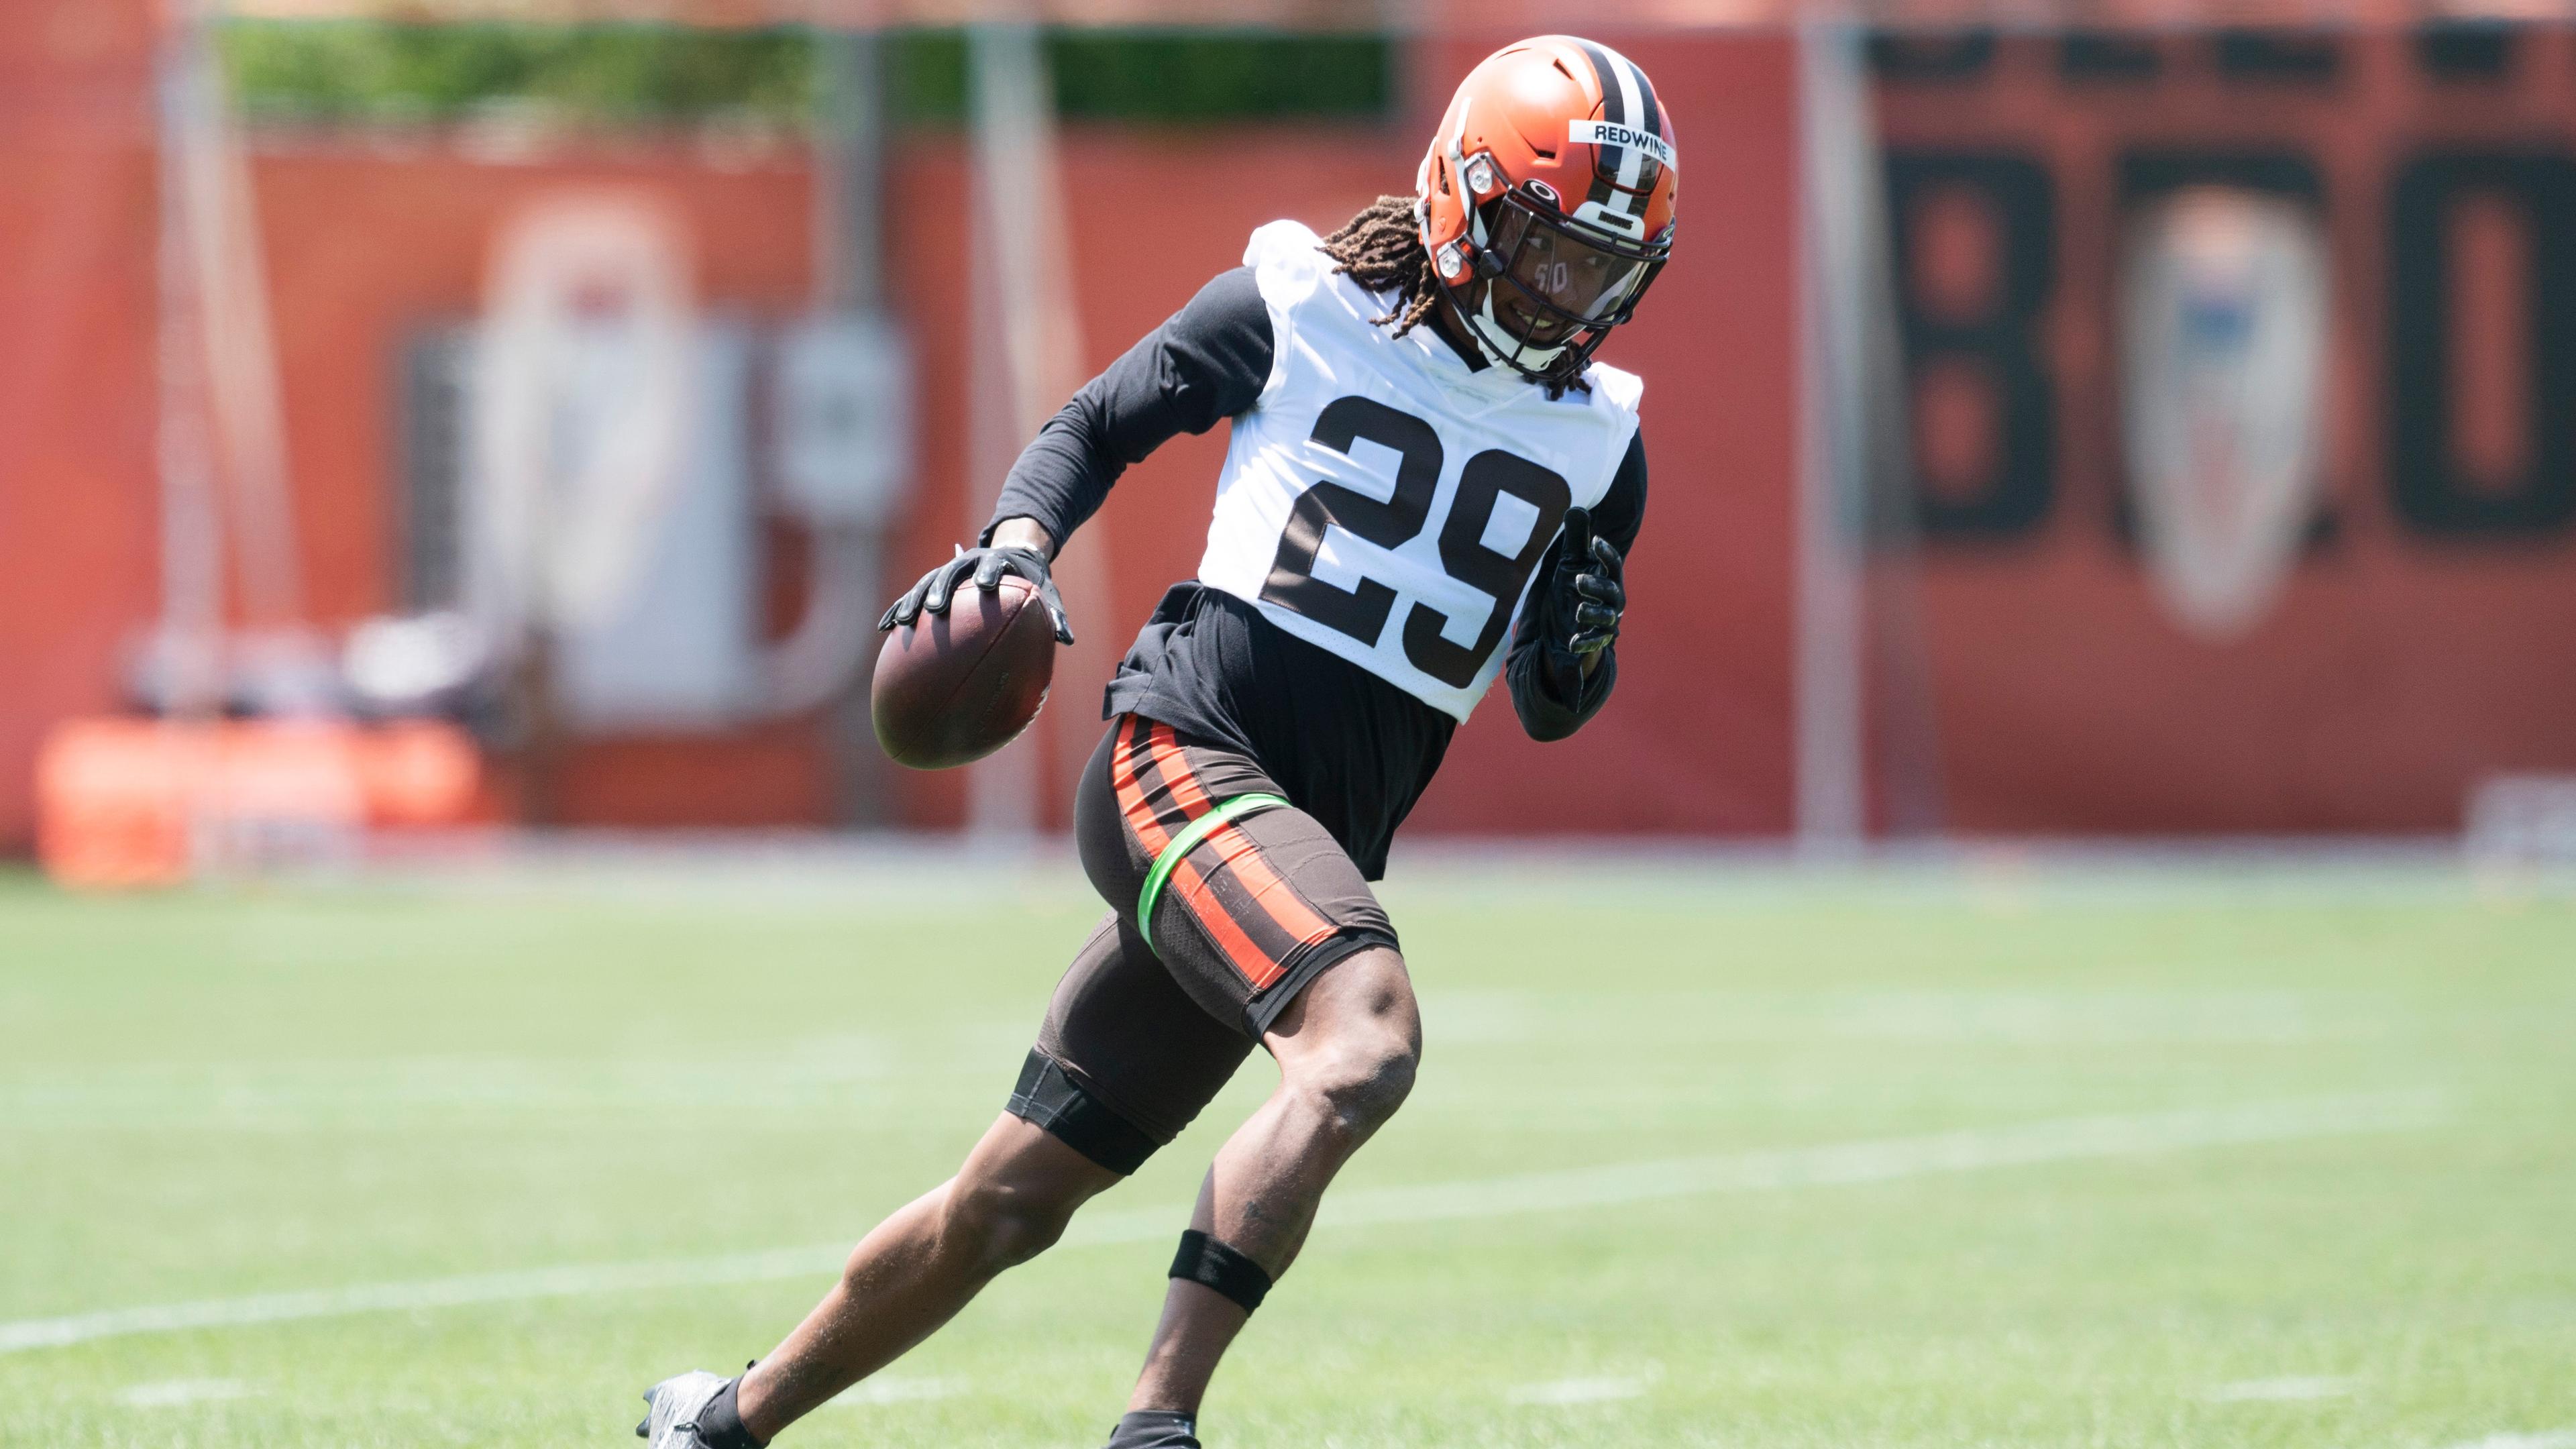 Cleveland Browns defensive back Sheldrick Redwine (29) runs with the ball during minicamp at the Cleveland Browns training facility. / Ken Blaze/USA TODAY